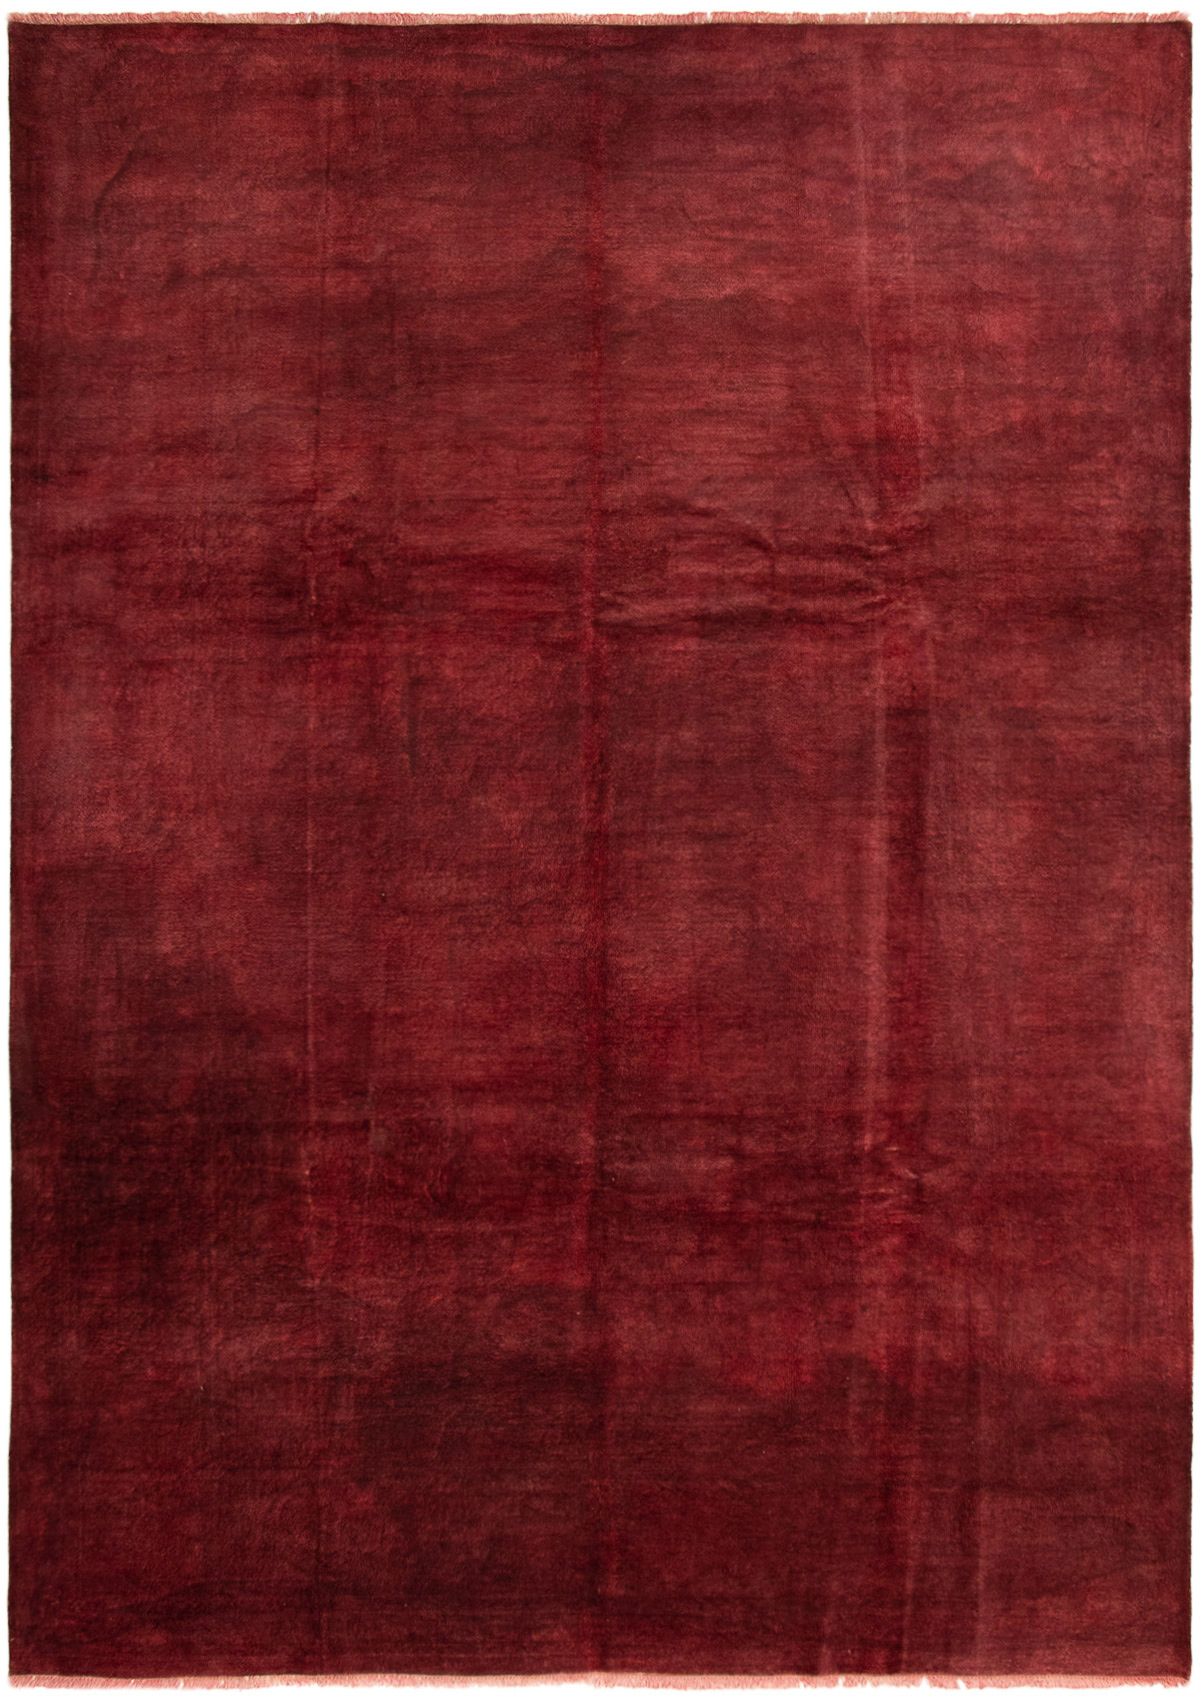 Hand-knotted Color transition Burgundy Wool Rug 9'7" x 13'6" Size: 9'7" x 13'6"  